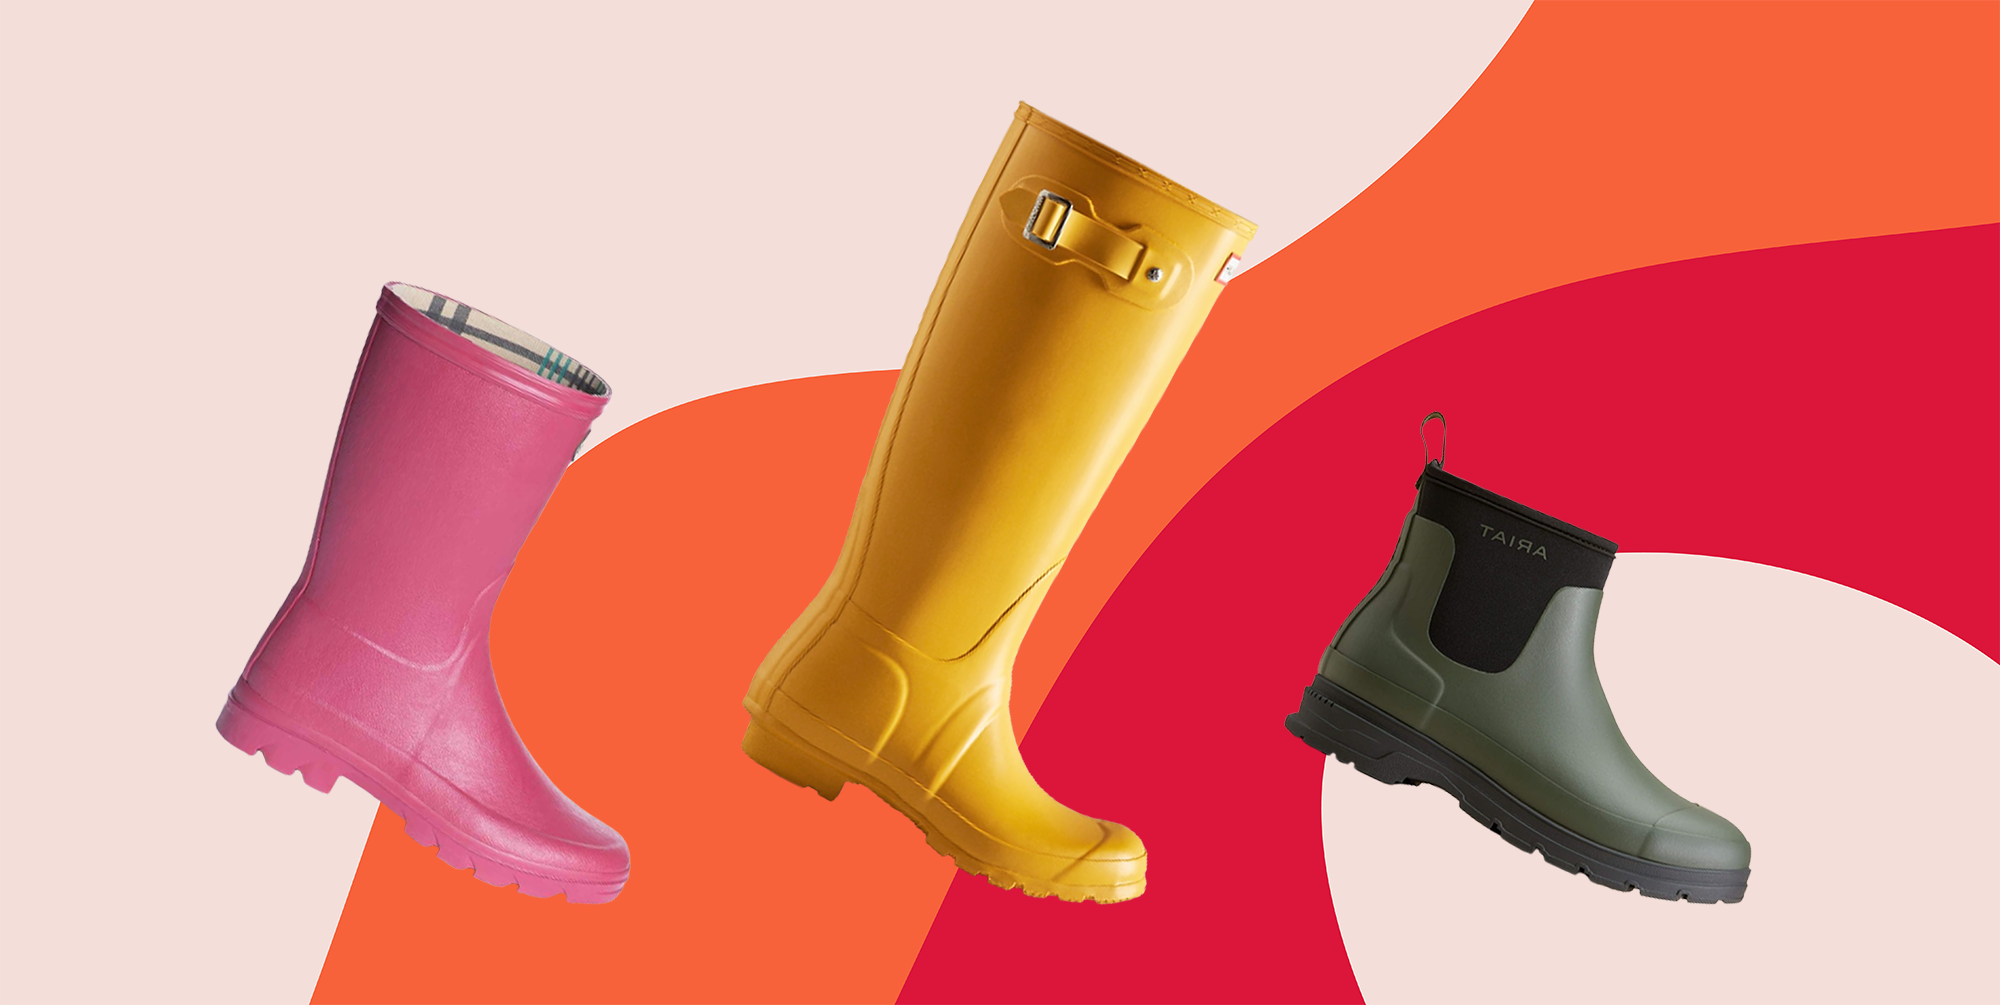 Best festival wellies that are comfortable, waterproof and durable